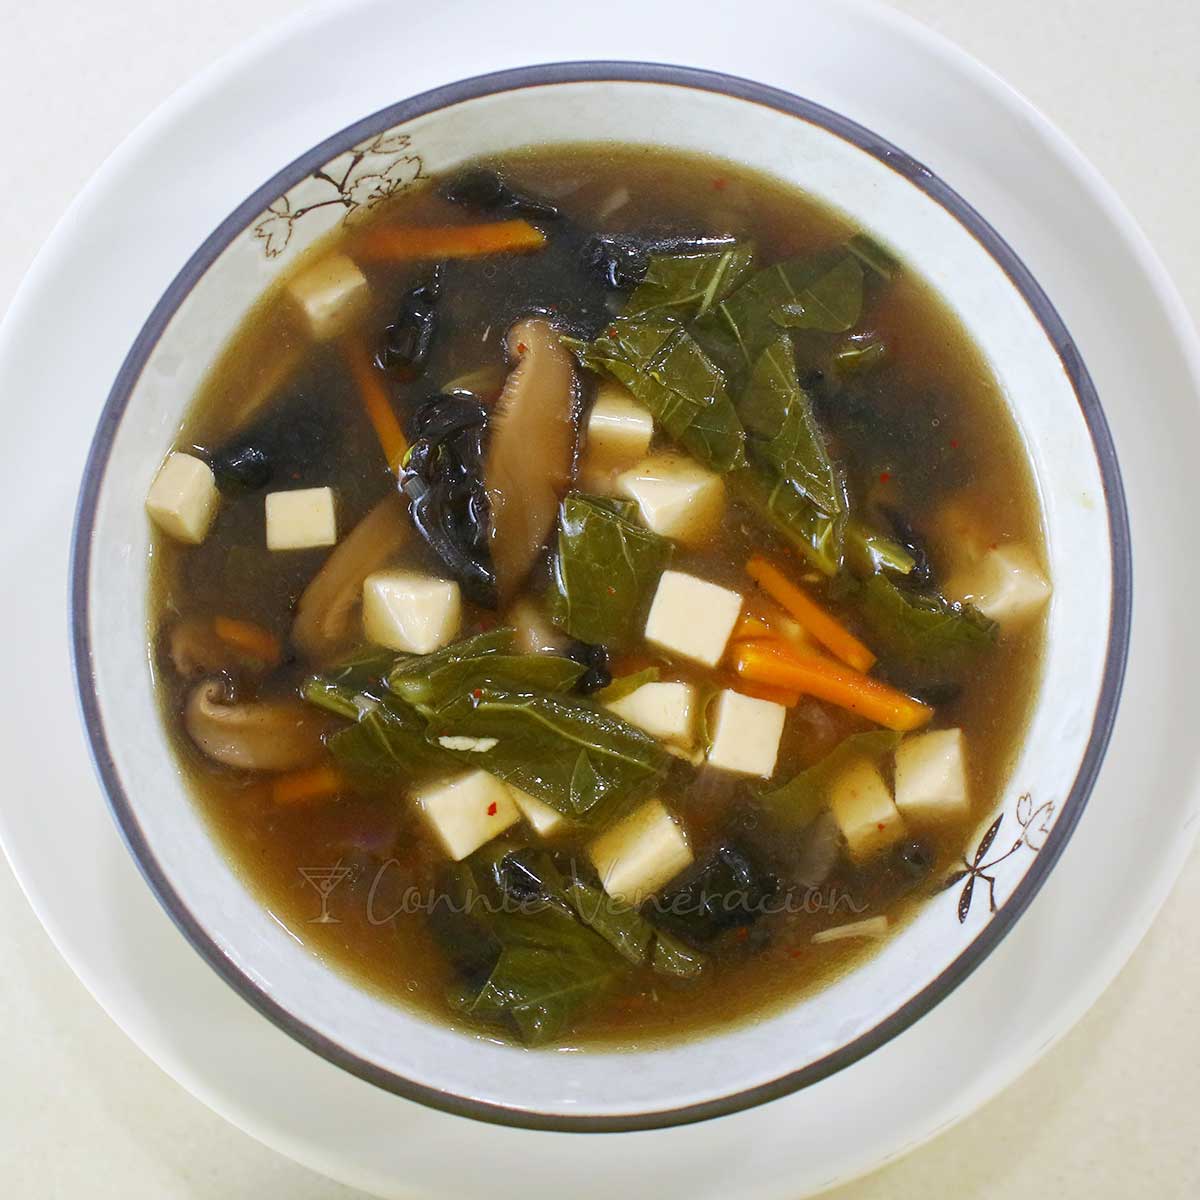 Chinese-style hot and sour soup